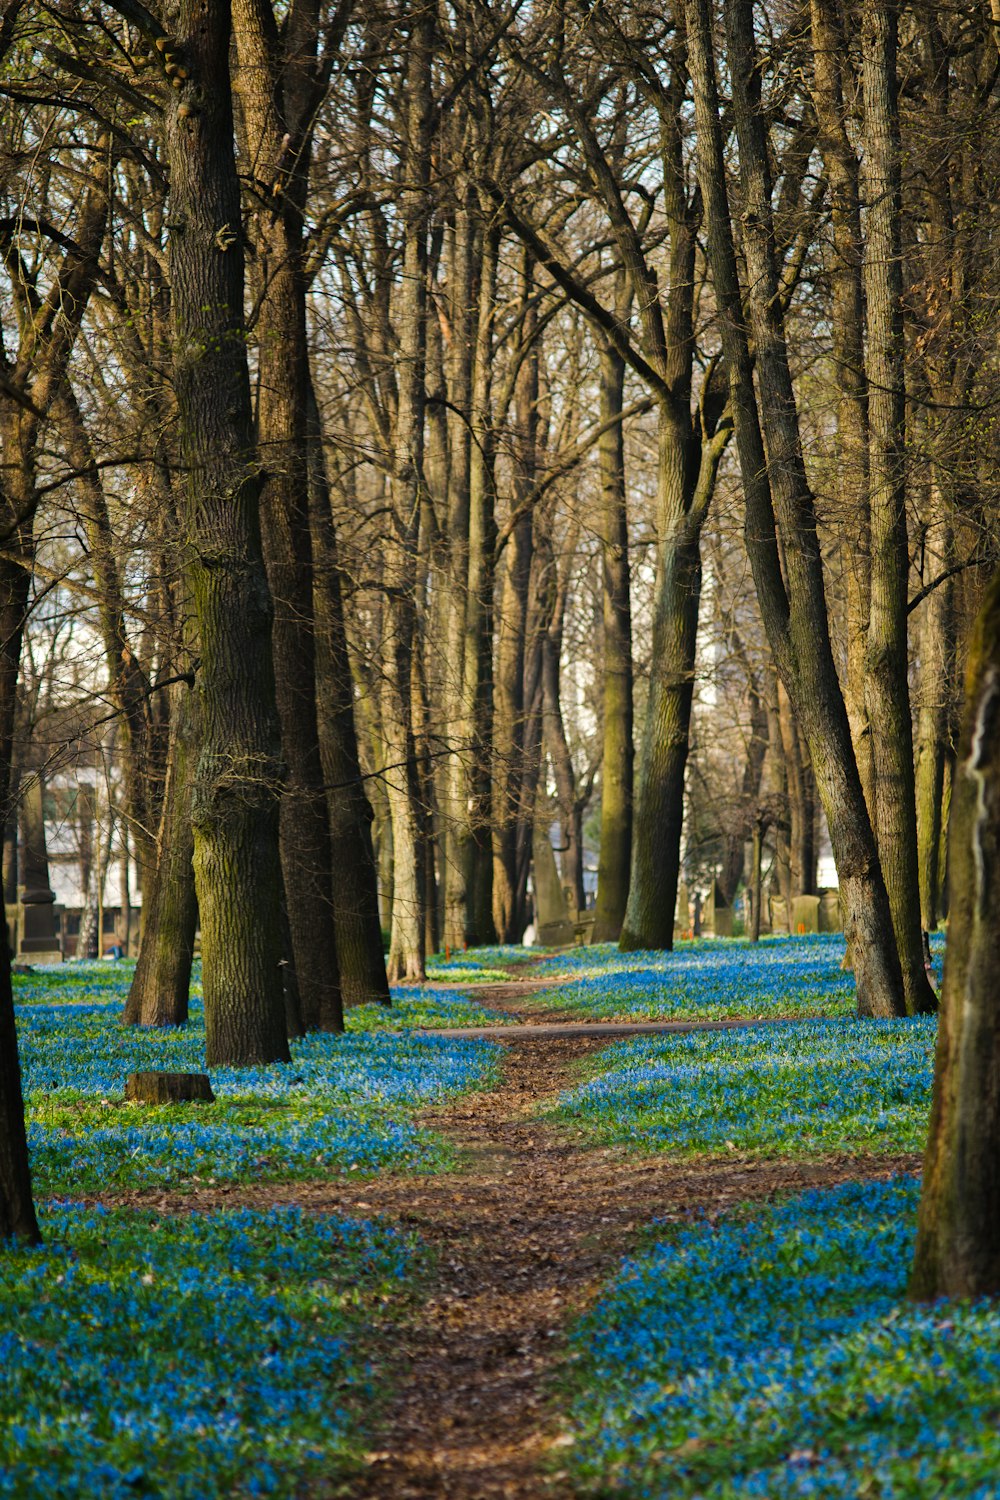 a path through a forest of blue flowers